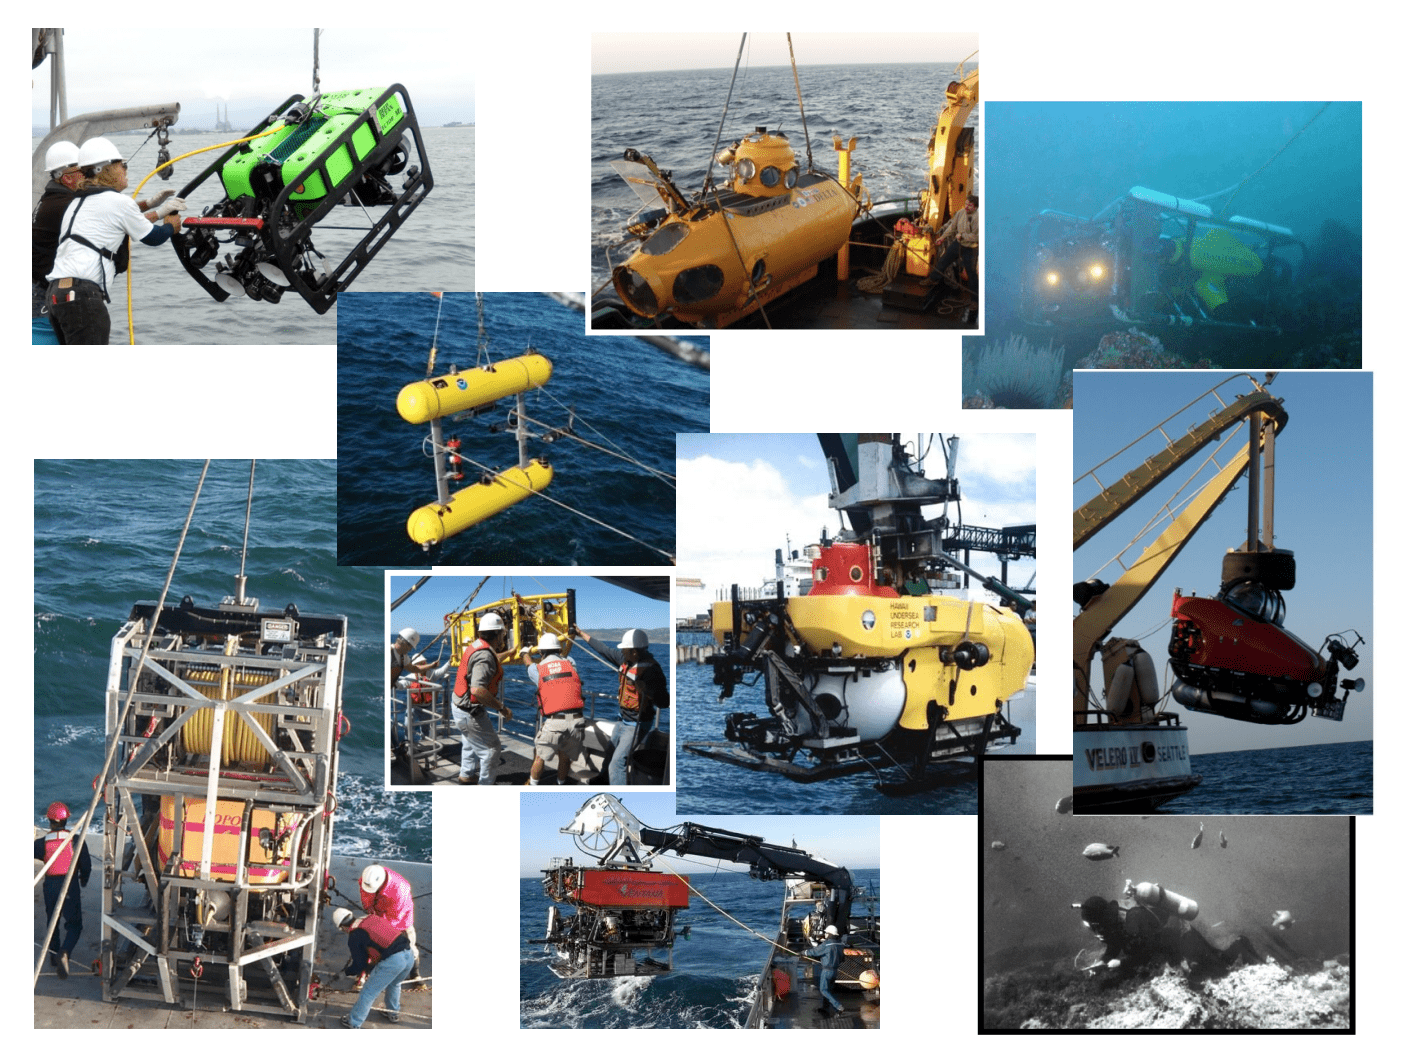 June 2015 - A COMPARATIVE ASSESSMENT OF UNDERWATER VISUAL SURVEY TOOLS: 85